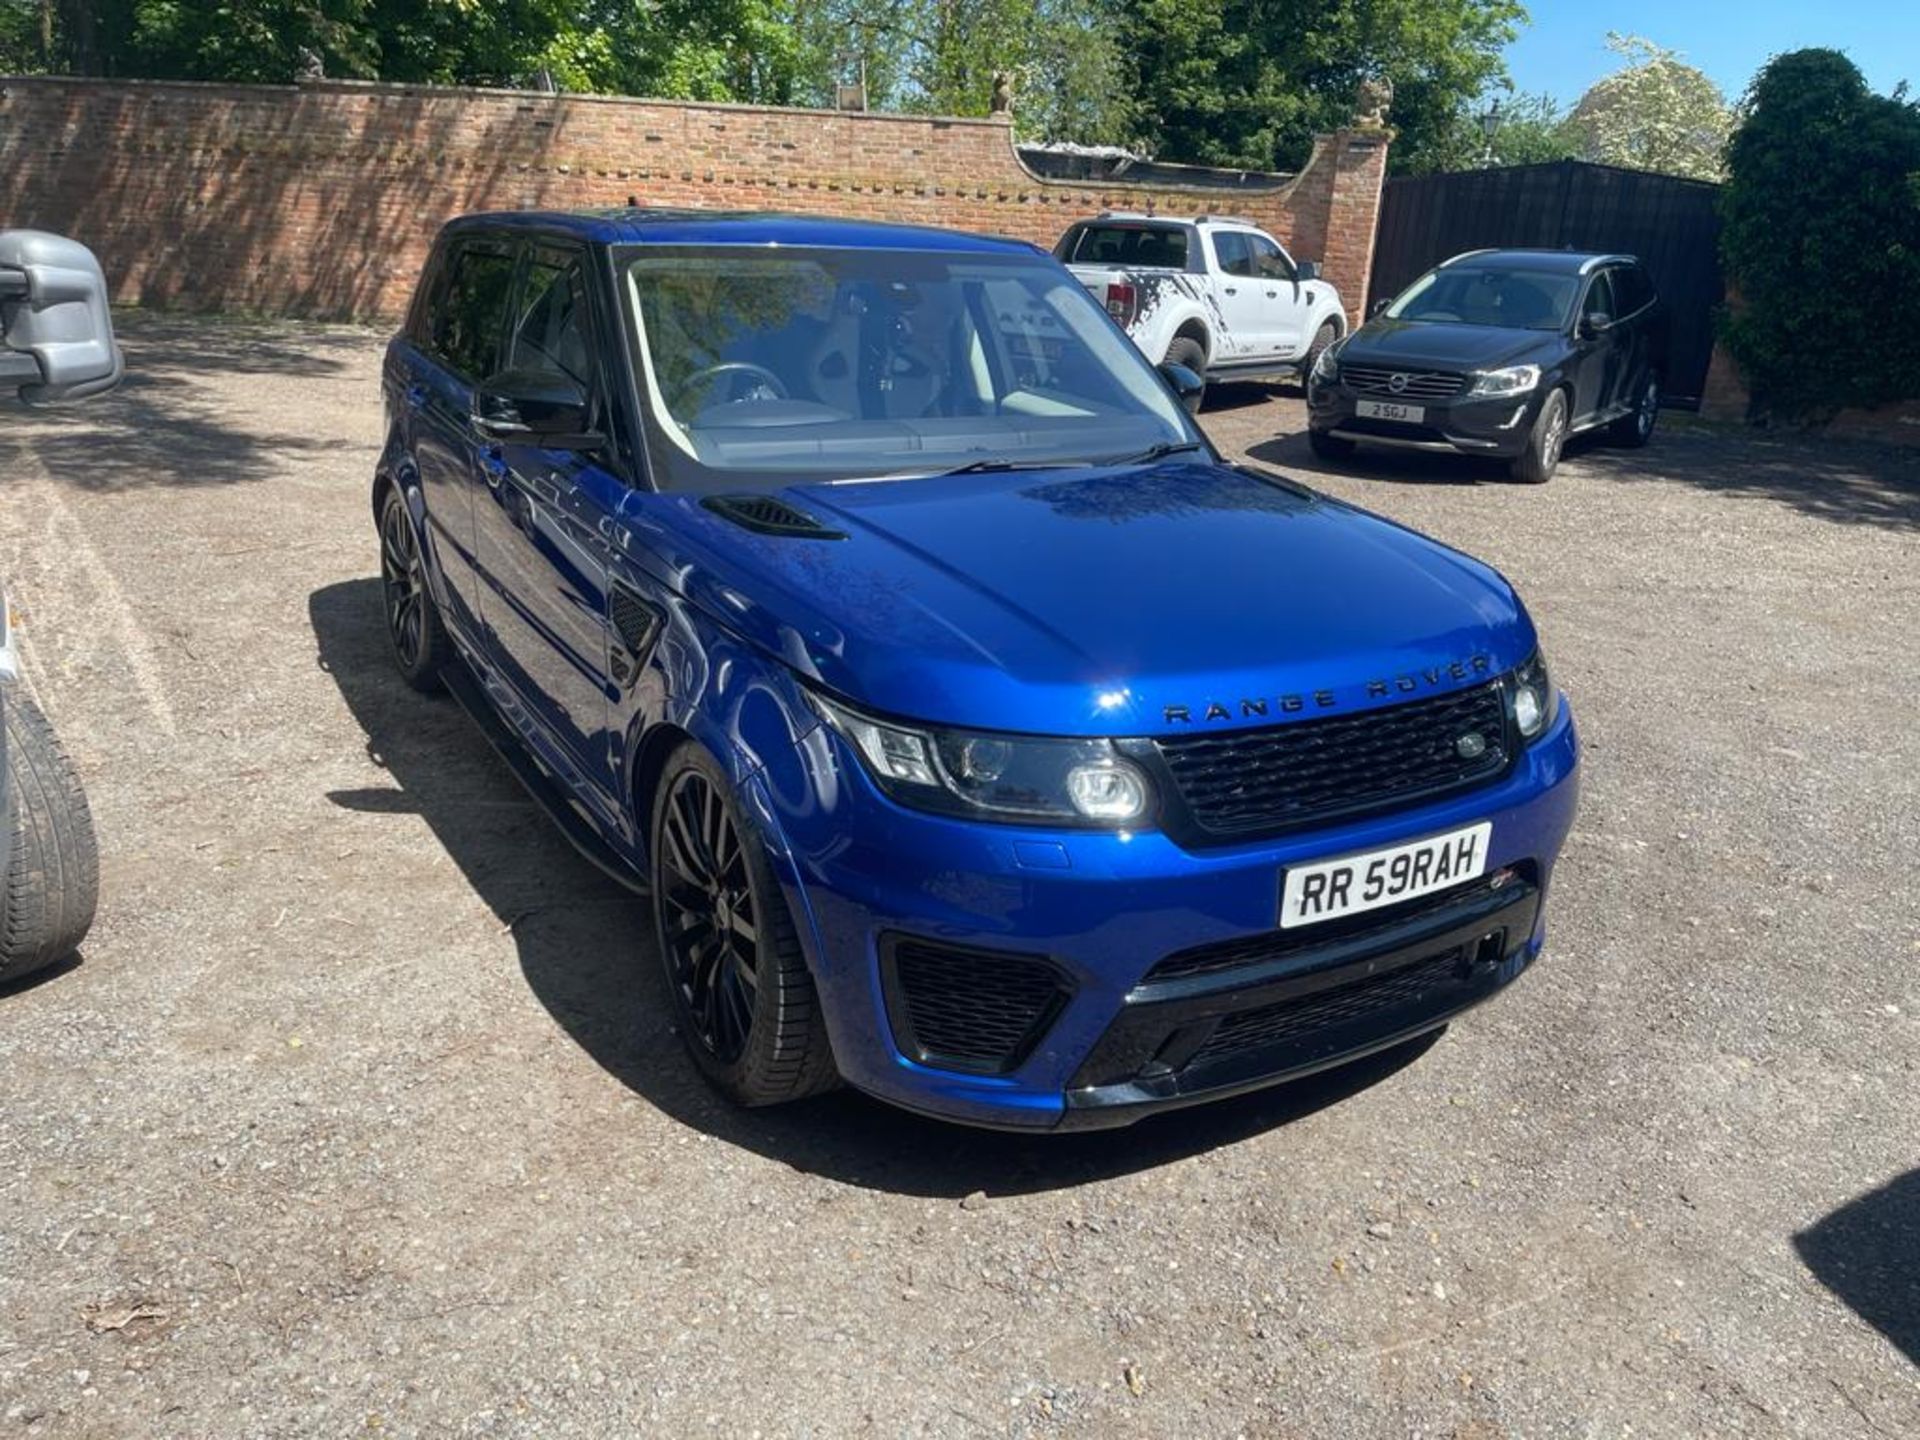 2016 RANGE ROVER SPORT SVR AUTOBIOGRAPHY DYNAMIC V8 SUPERCHARGED AUTOMATIC 5.0 550PS PETROL ENGINE - Image 6 of 28